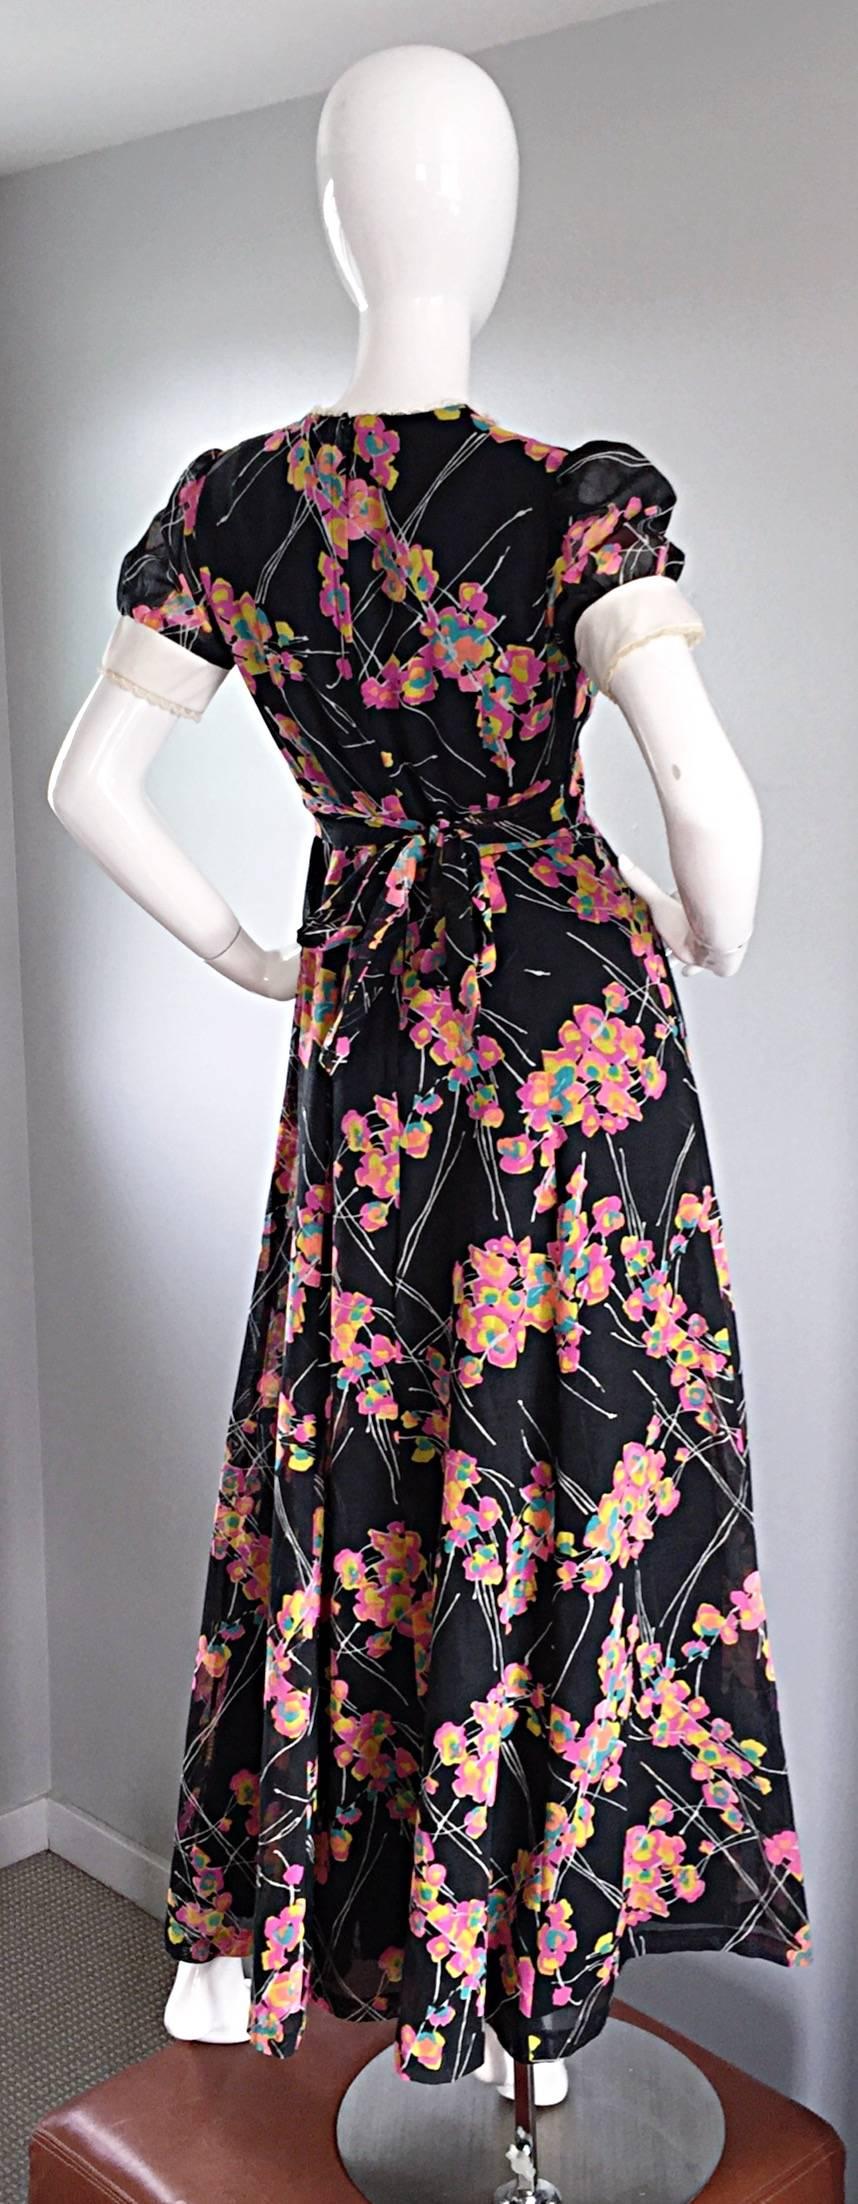 1970s Joseph Magnin Black Multi Colored Flower Print Vintage 70s Maxi Dress In Excellent Condition For Sale In San Diego, CA